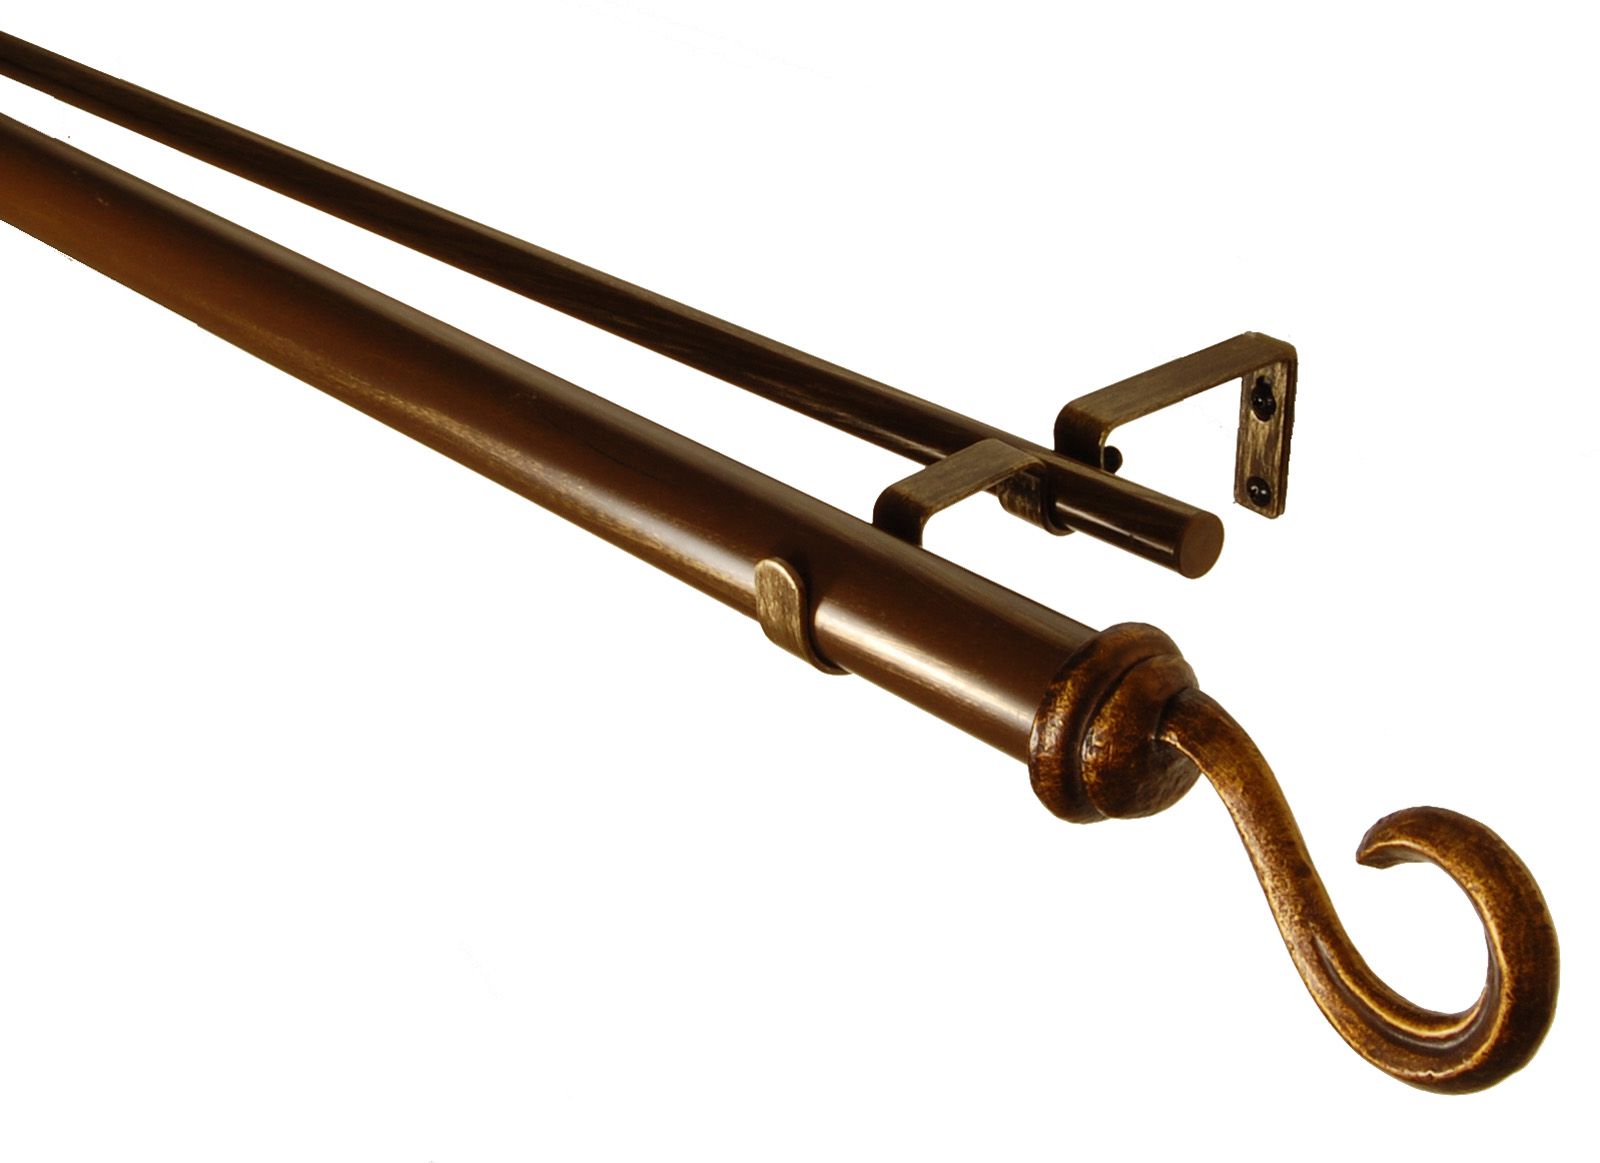 BCL Hook Double Curtain Rod, Antique Gold Finish, 28-inch to 48-inch, 1.25-inch Diameter Pole